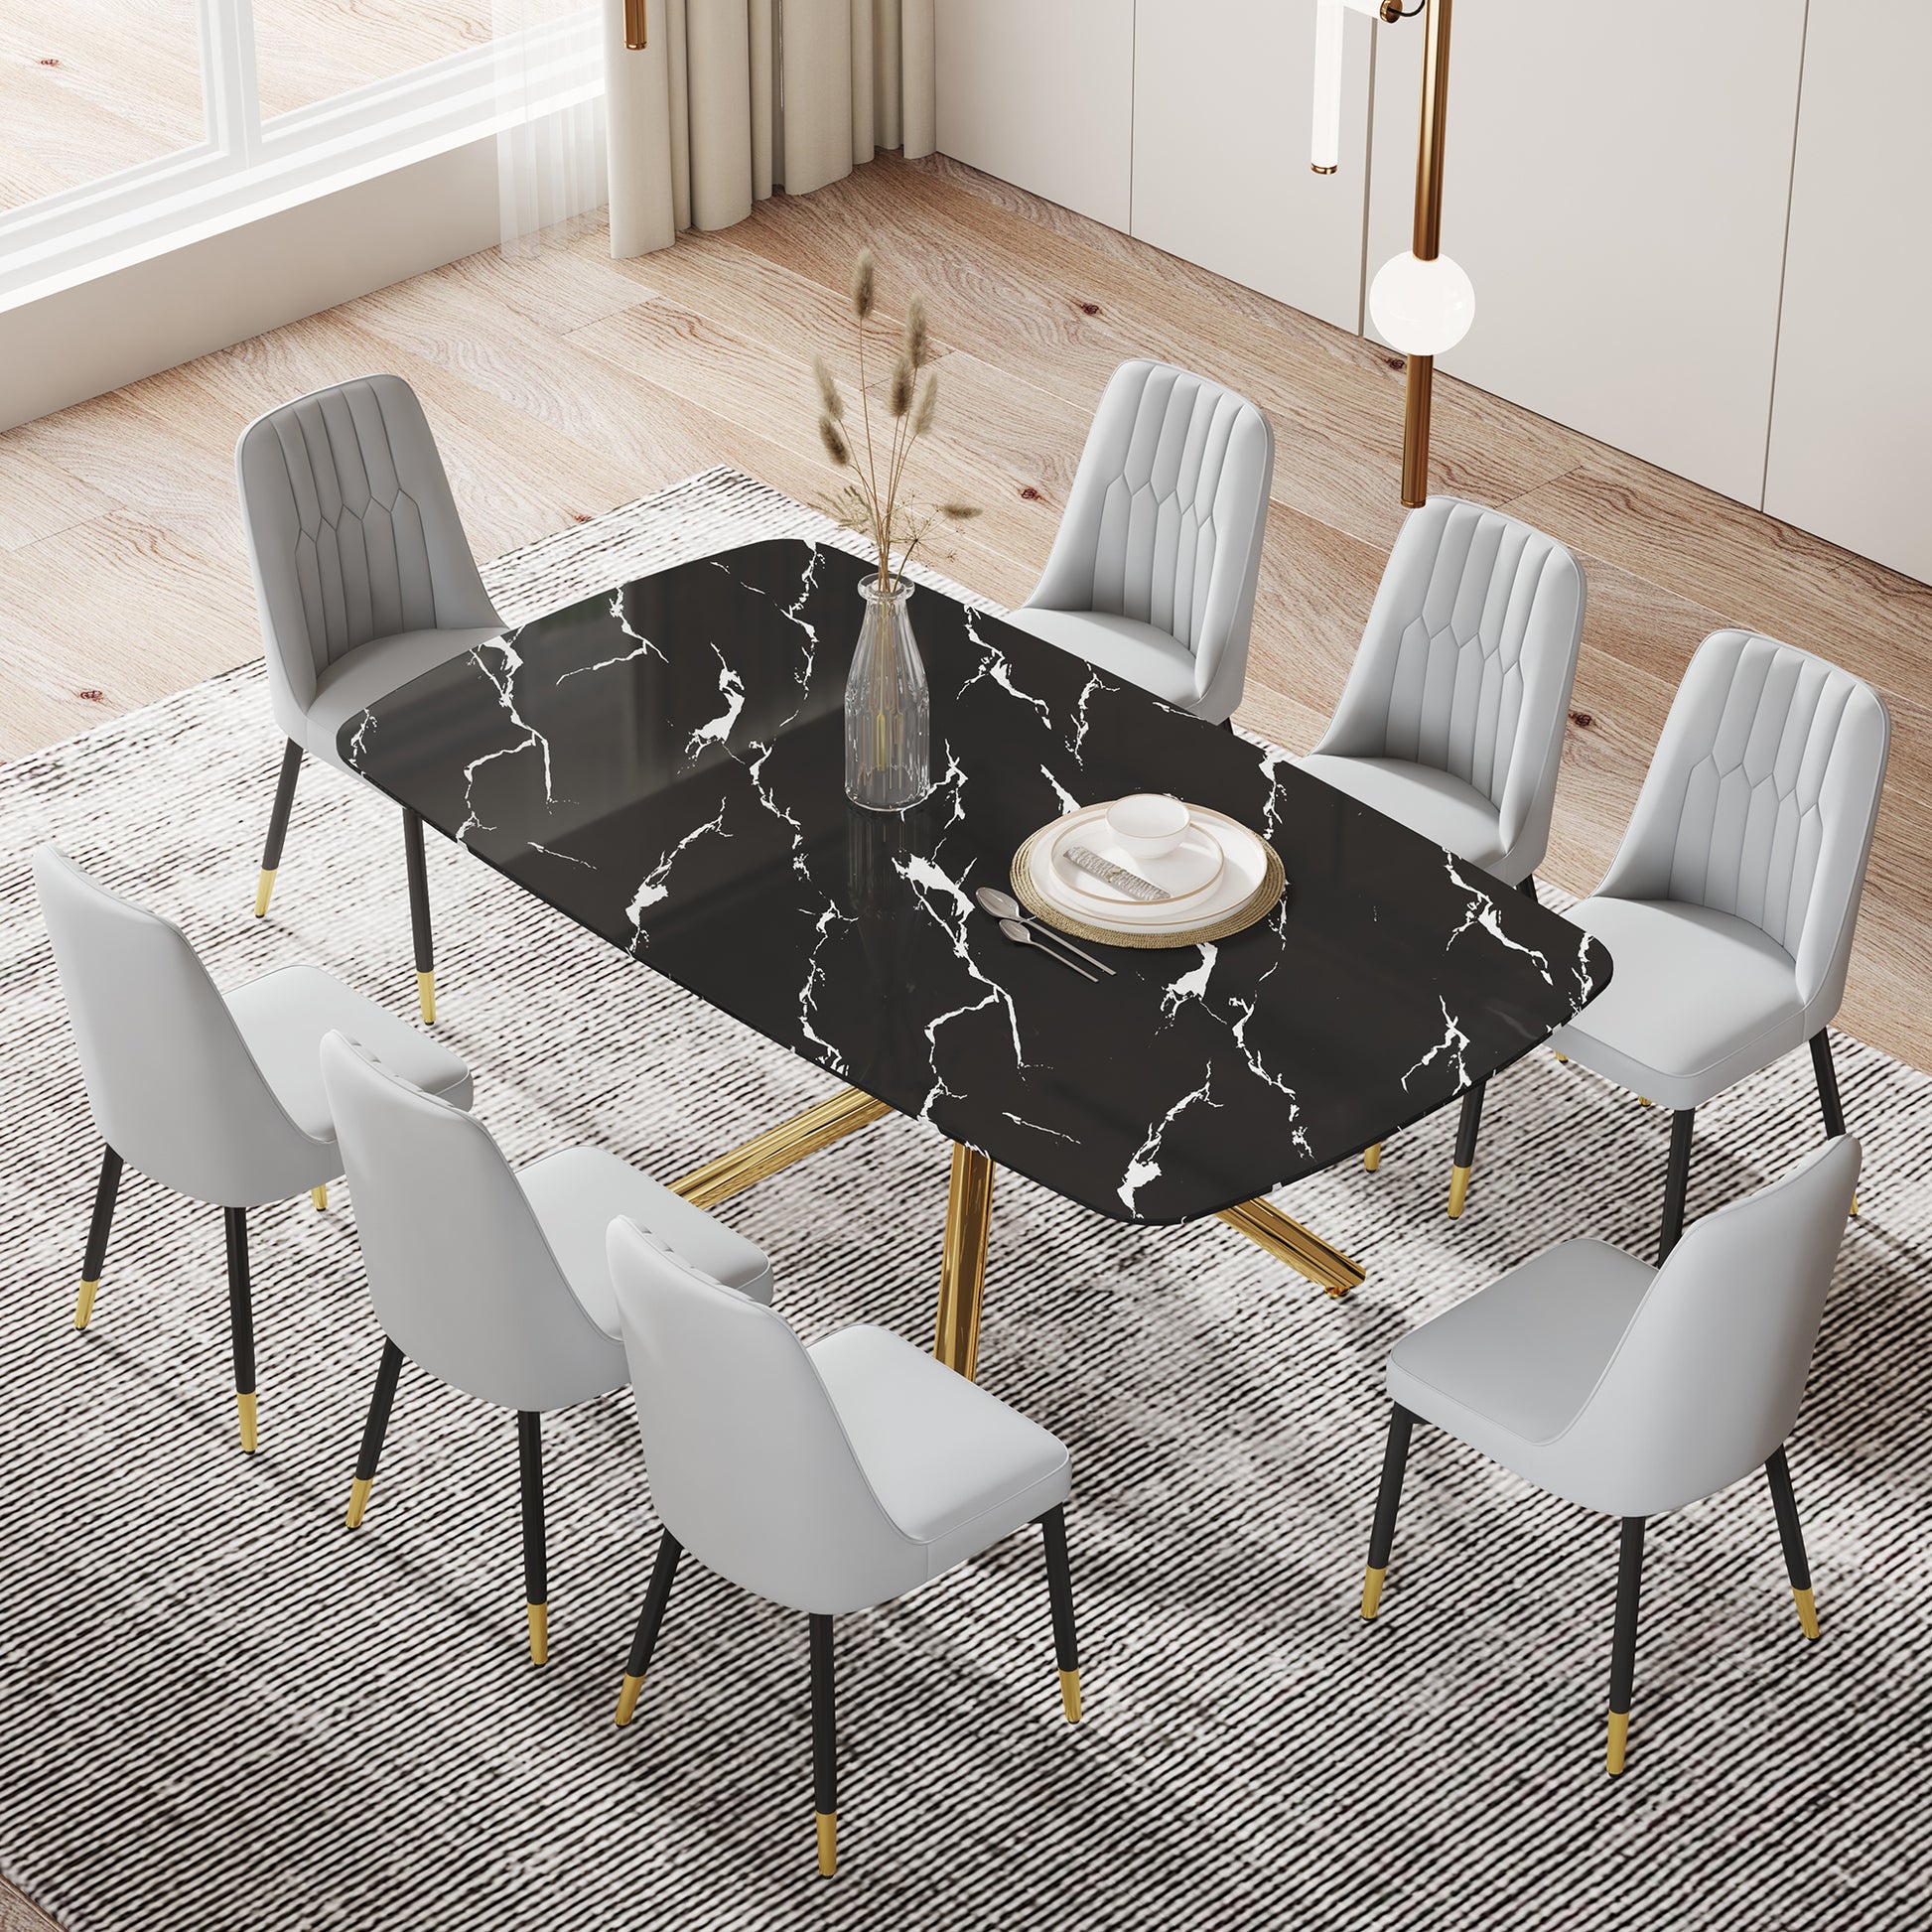 Large modern minimalist rectangular dining table with black+gold-glass+metal